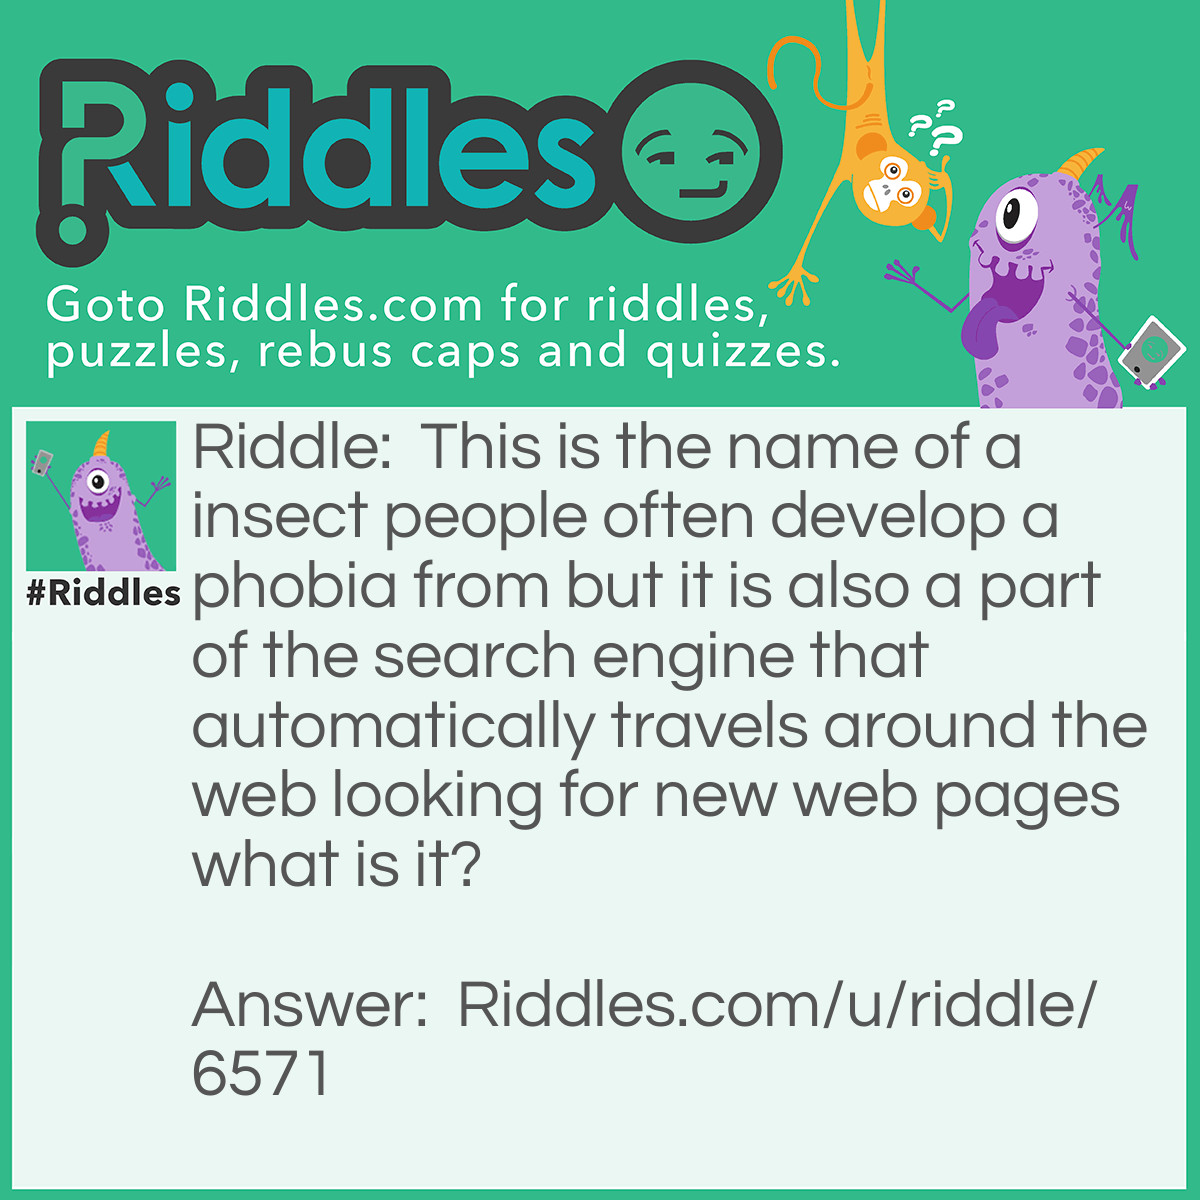 Riddle: This is the name of a insect people often develop a phobia from but it is also a part of the search engine that automatically travels around the web looking for new web pages what is it? Answer: spiders